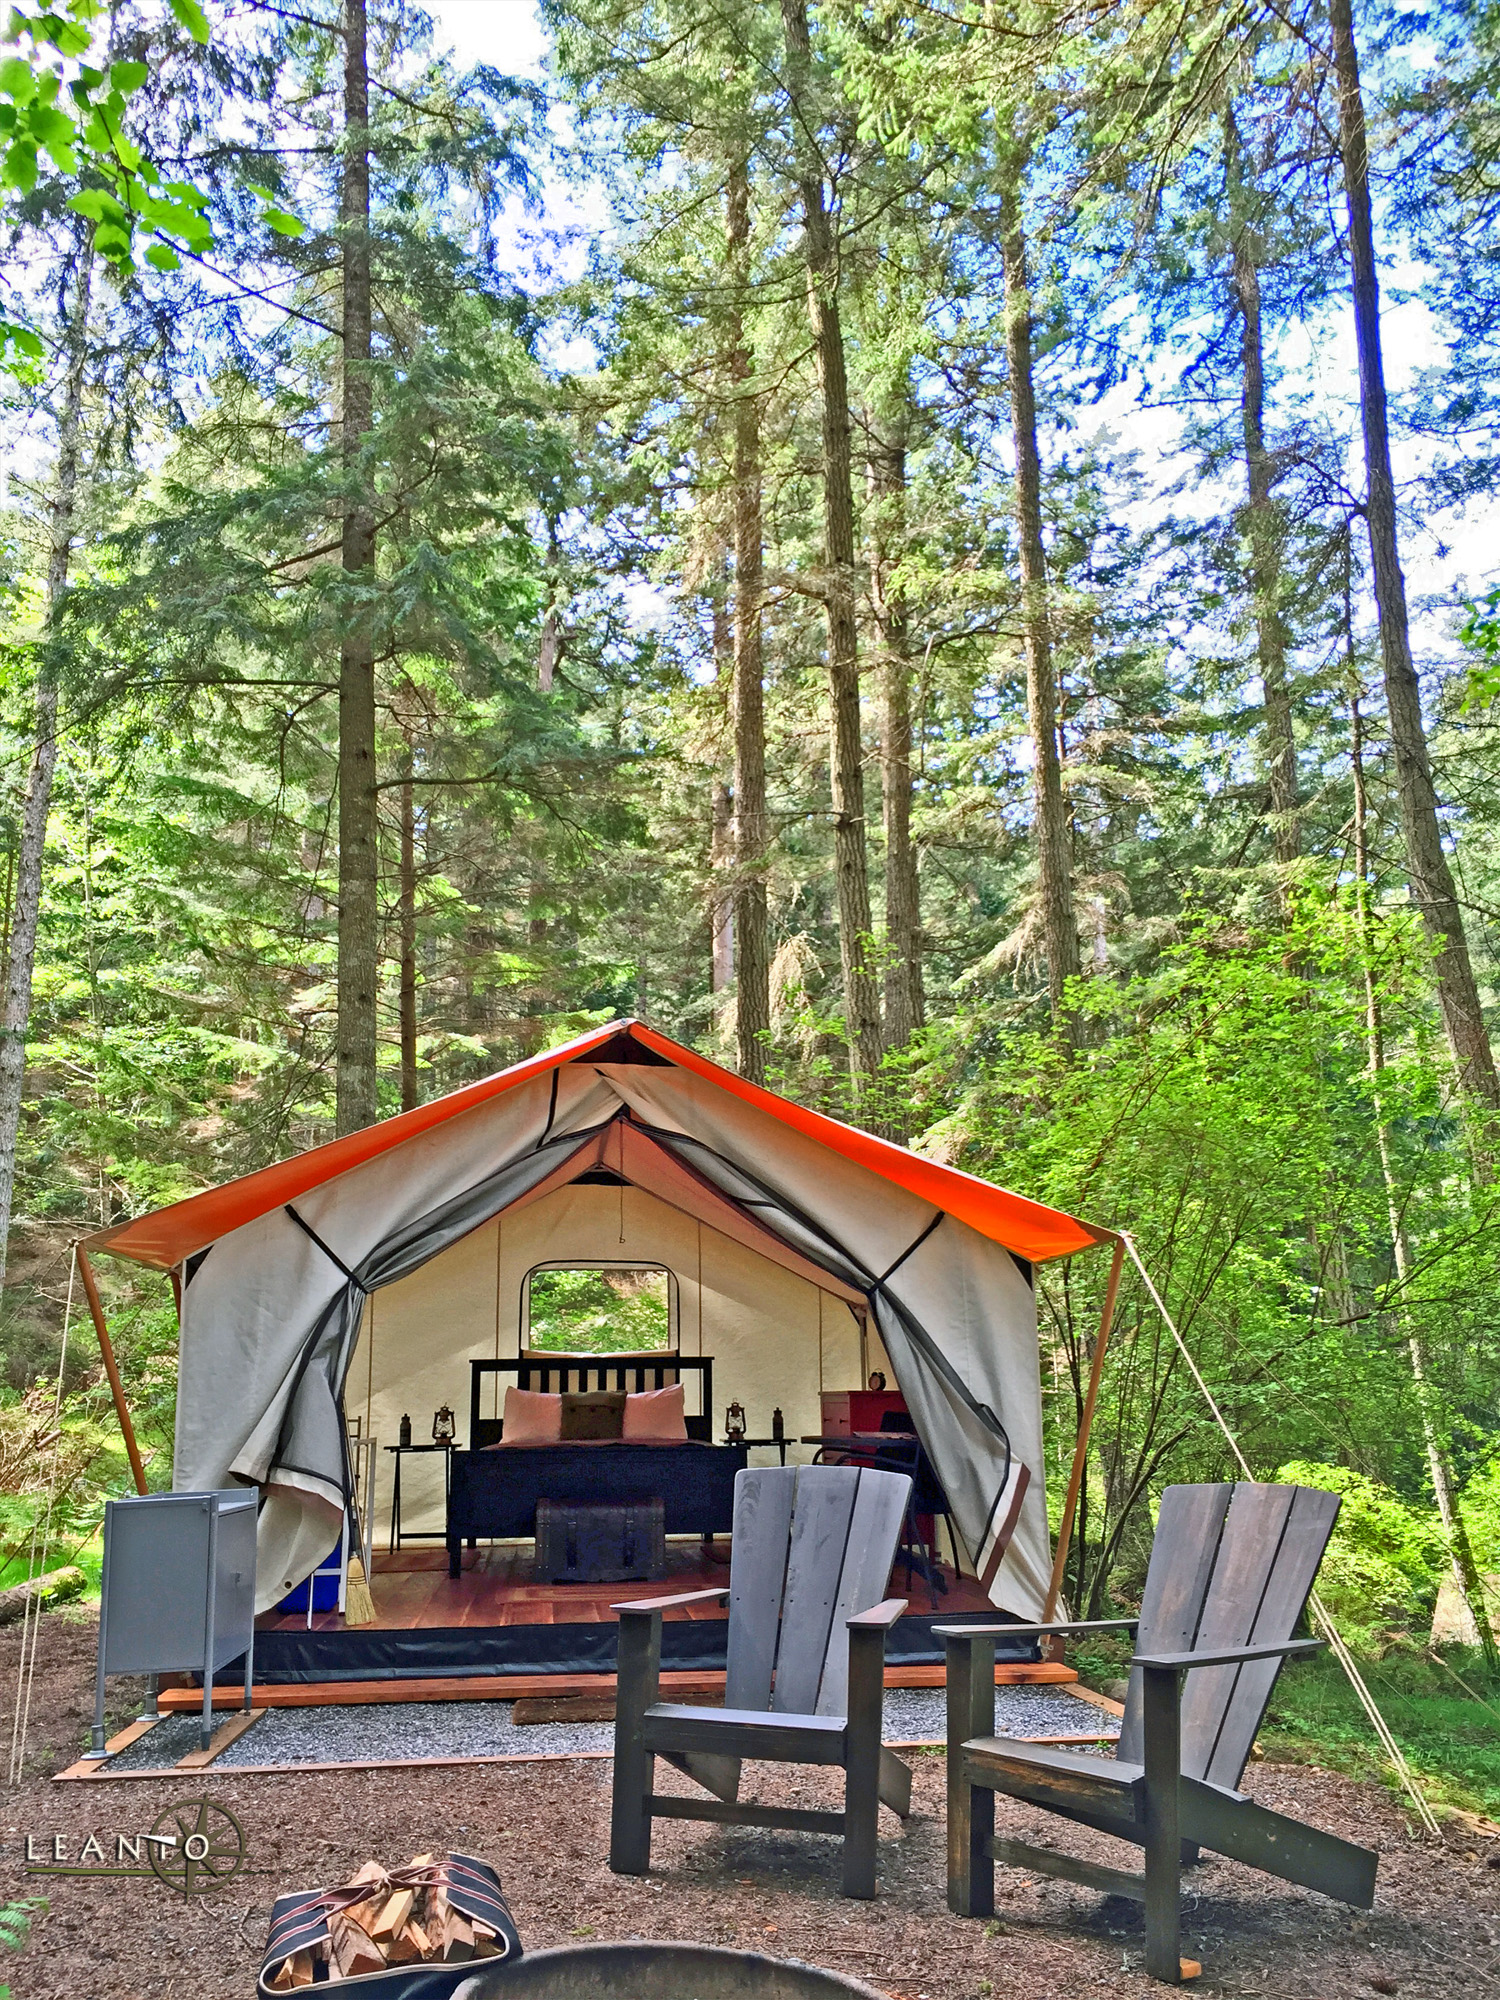 LEANTO Moran State Park Glamping Luxury Camping Orcas Island